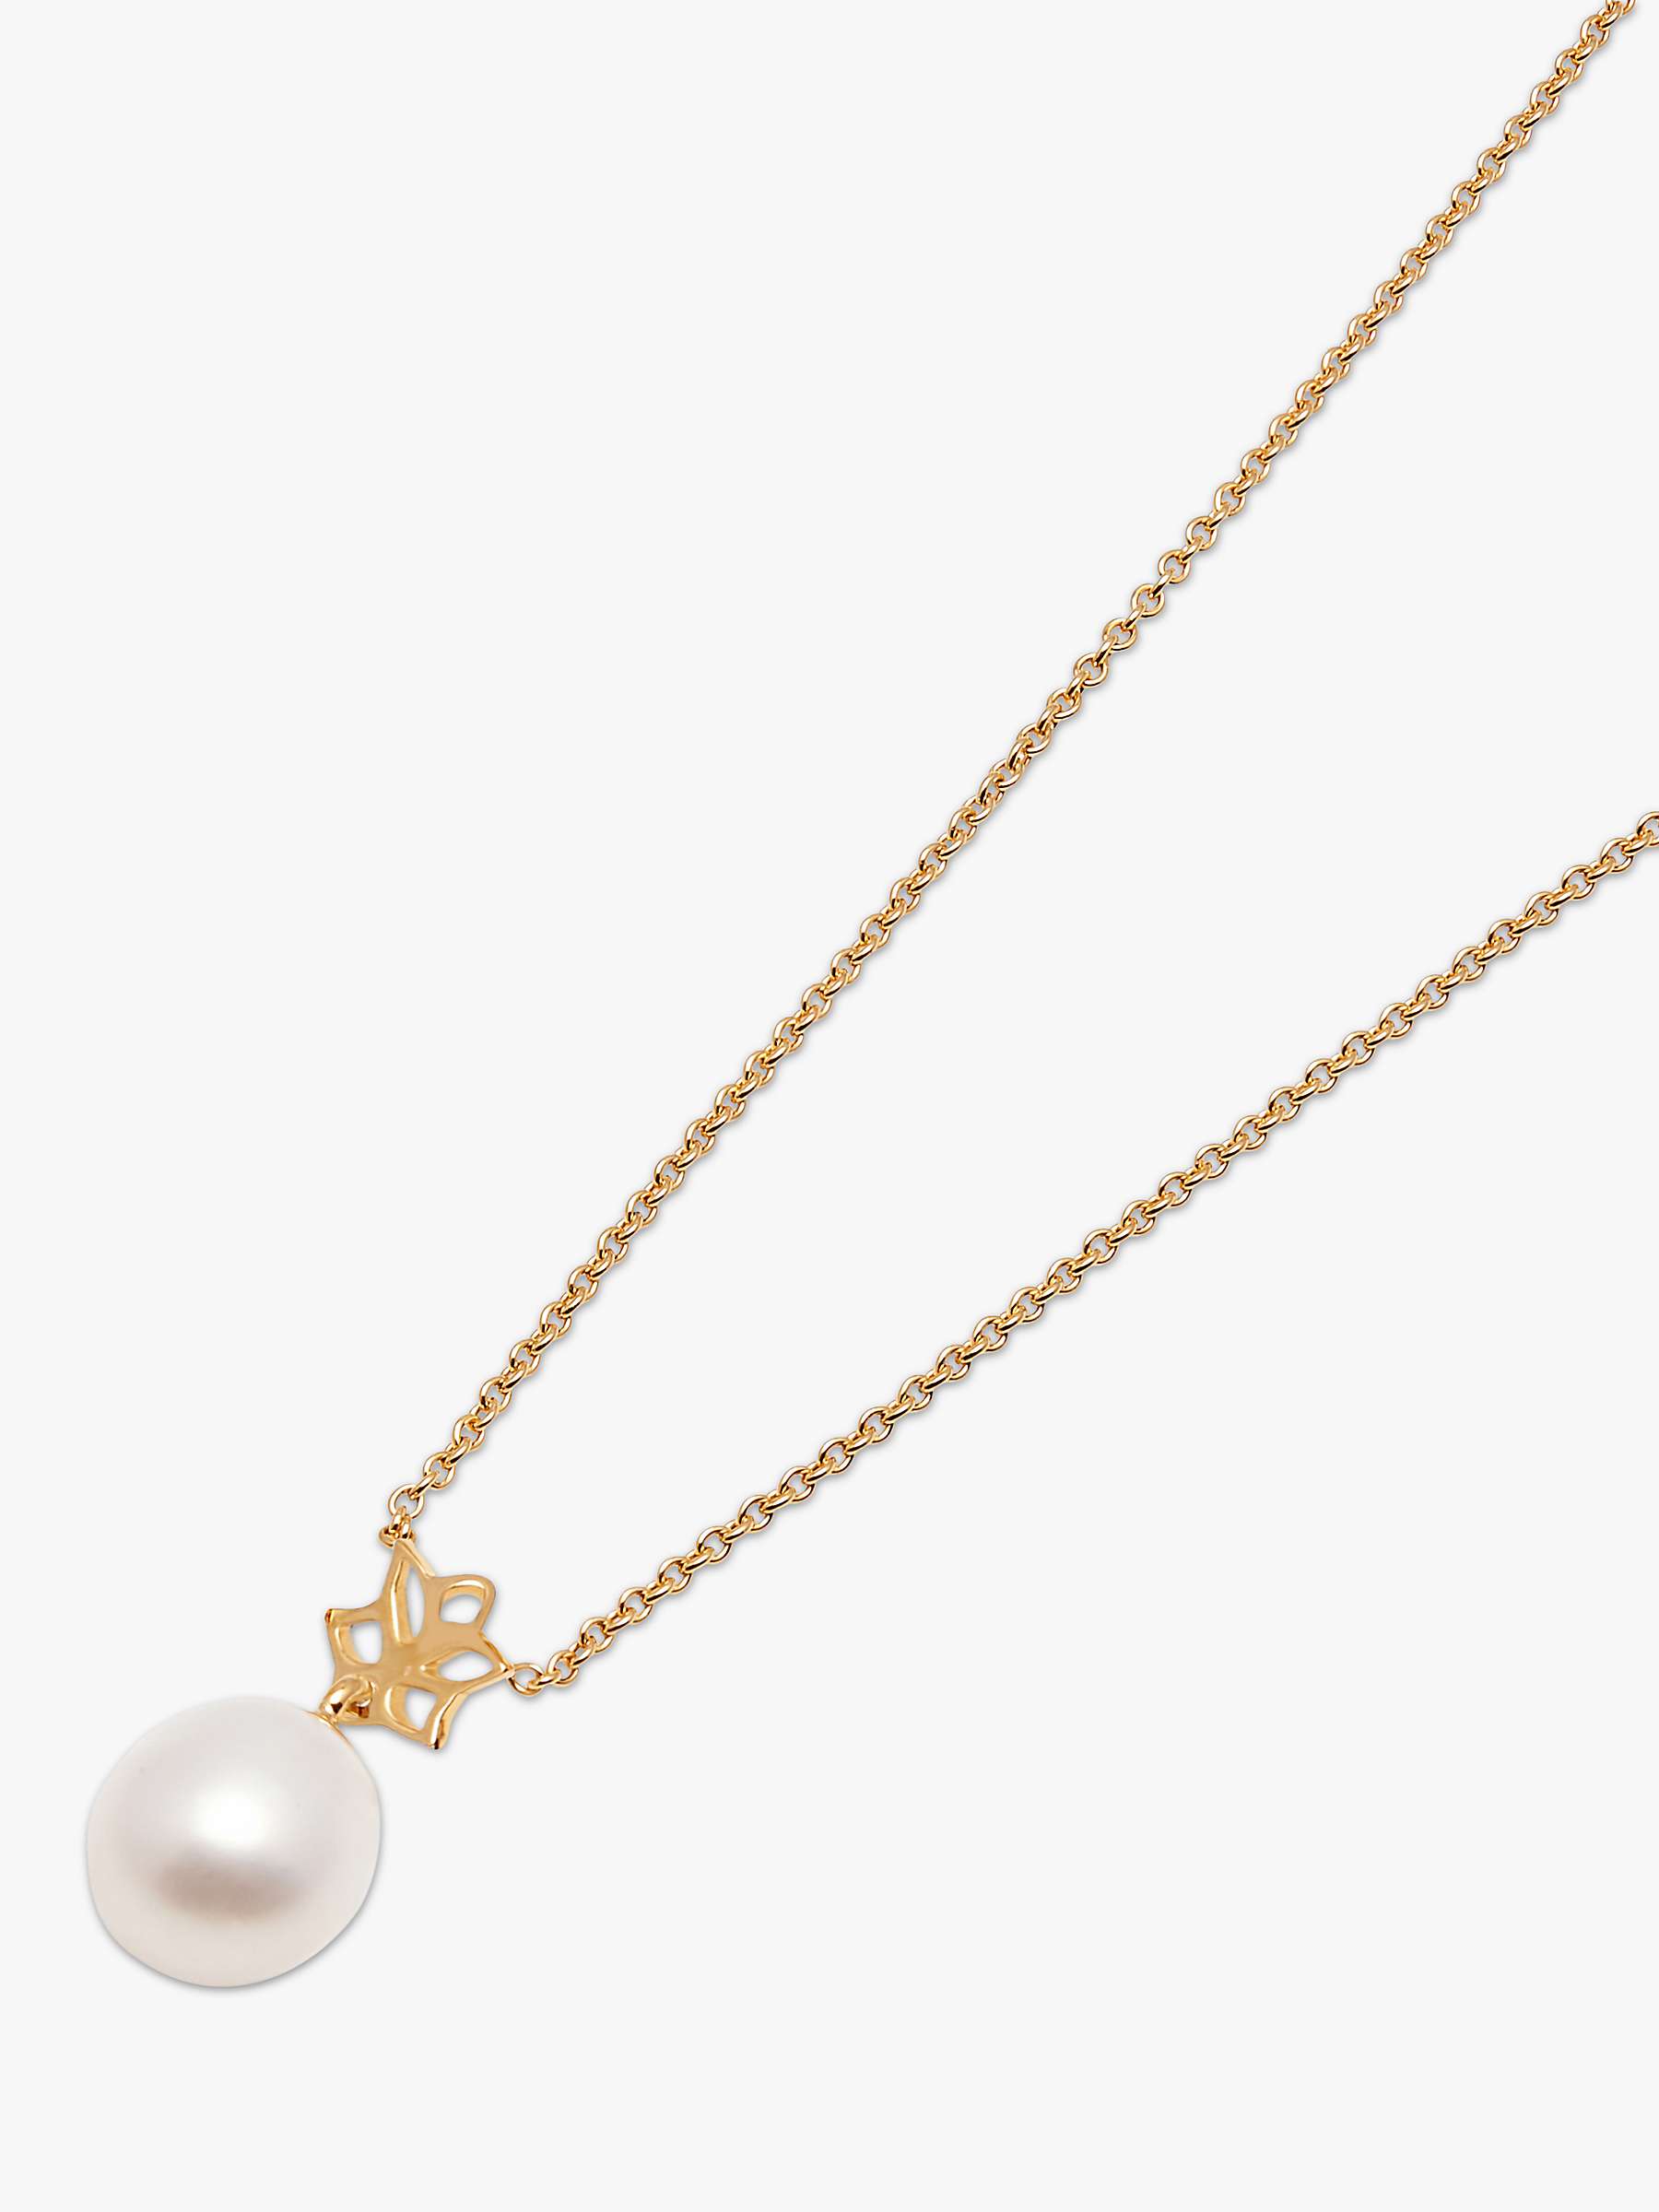 Buy A B Davis 9ct Yellow Gold Freshwater Pearl Pendant Necklace, White Online at johnlewis.com